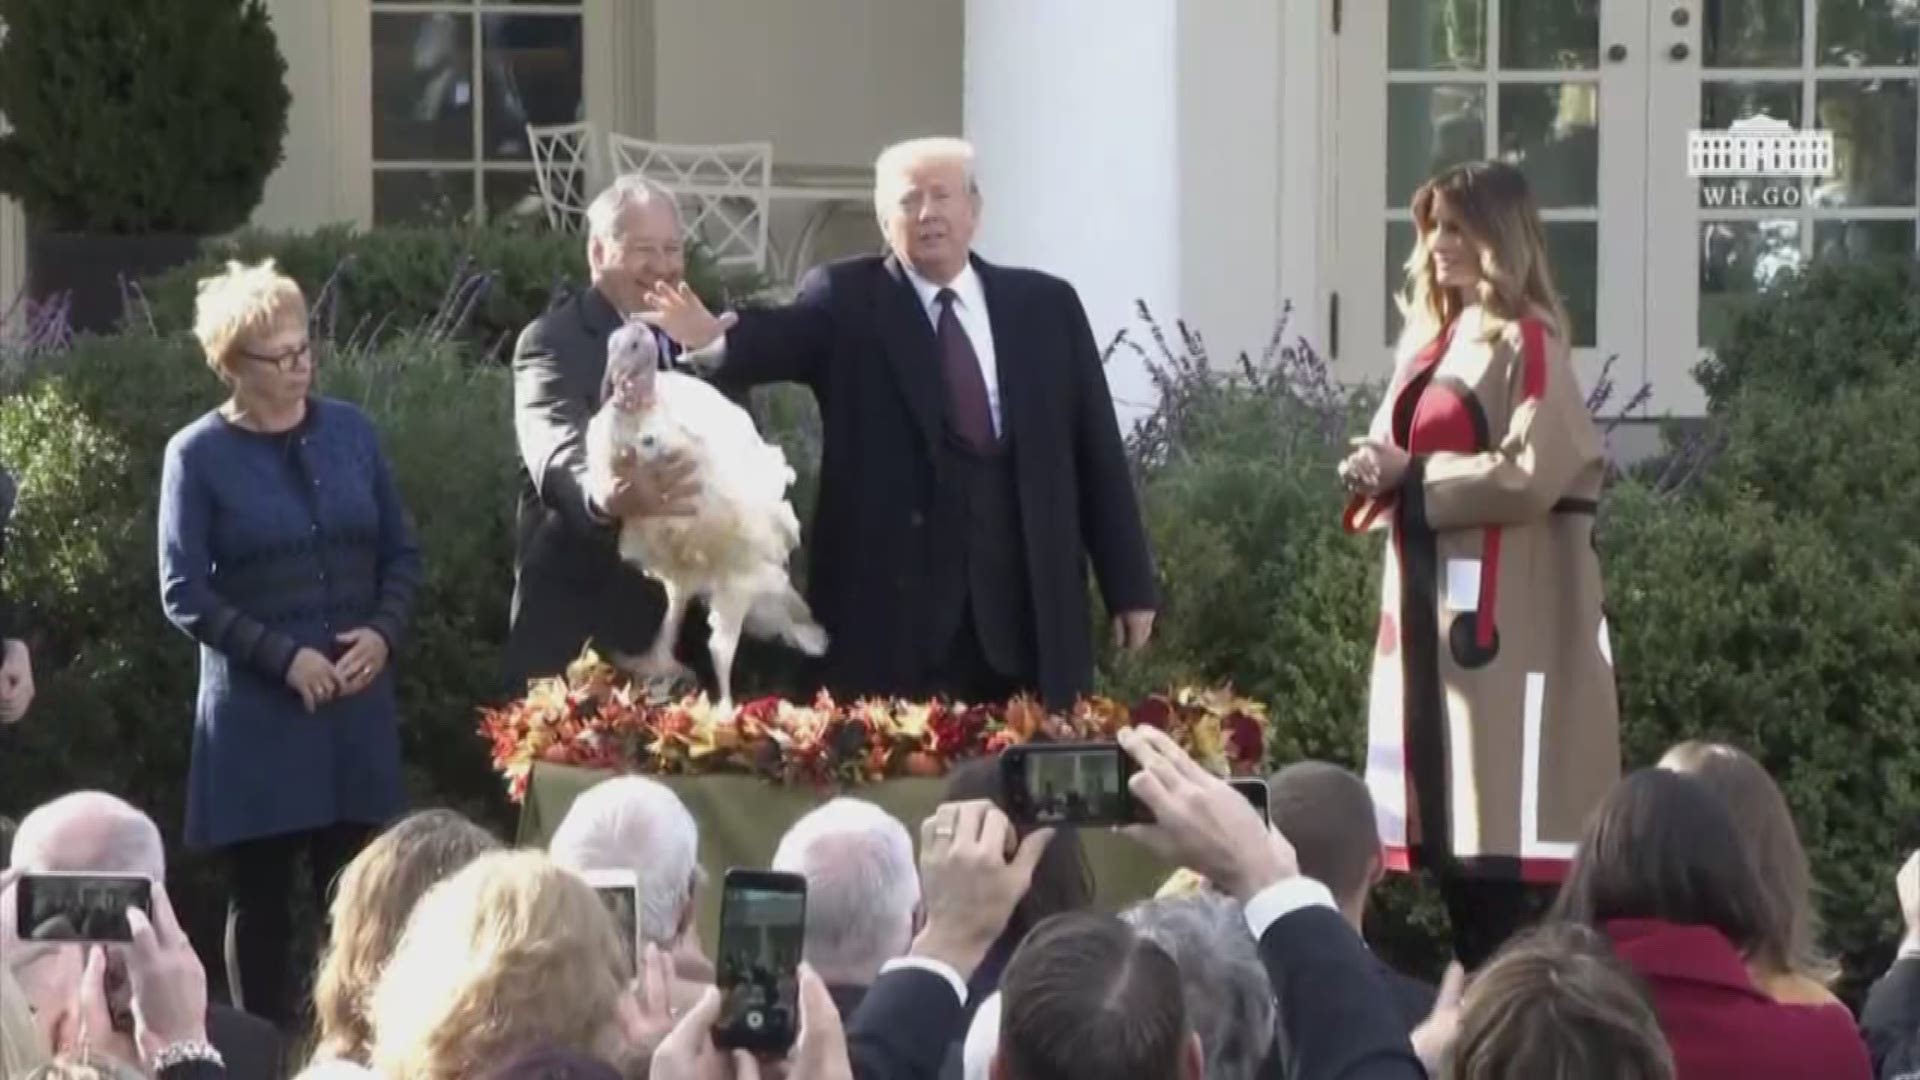 Trump's poultry pardon means that a 39-pound bird named Peas and a 41-pounder named Carrots - will get to live the rest of their lives at a Virginia farm.